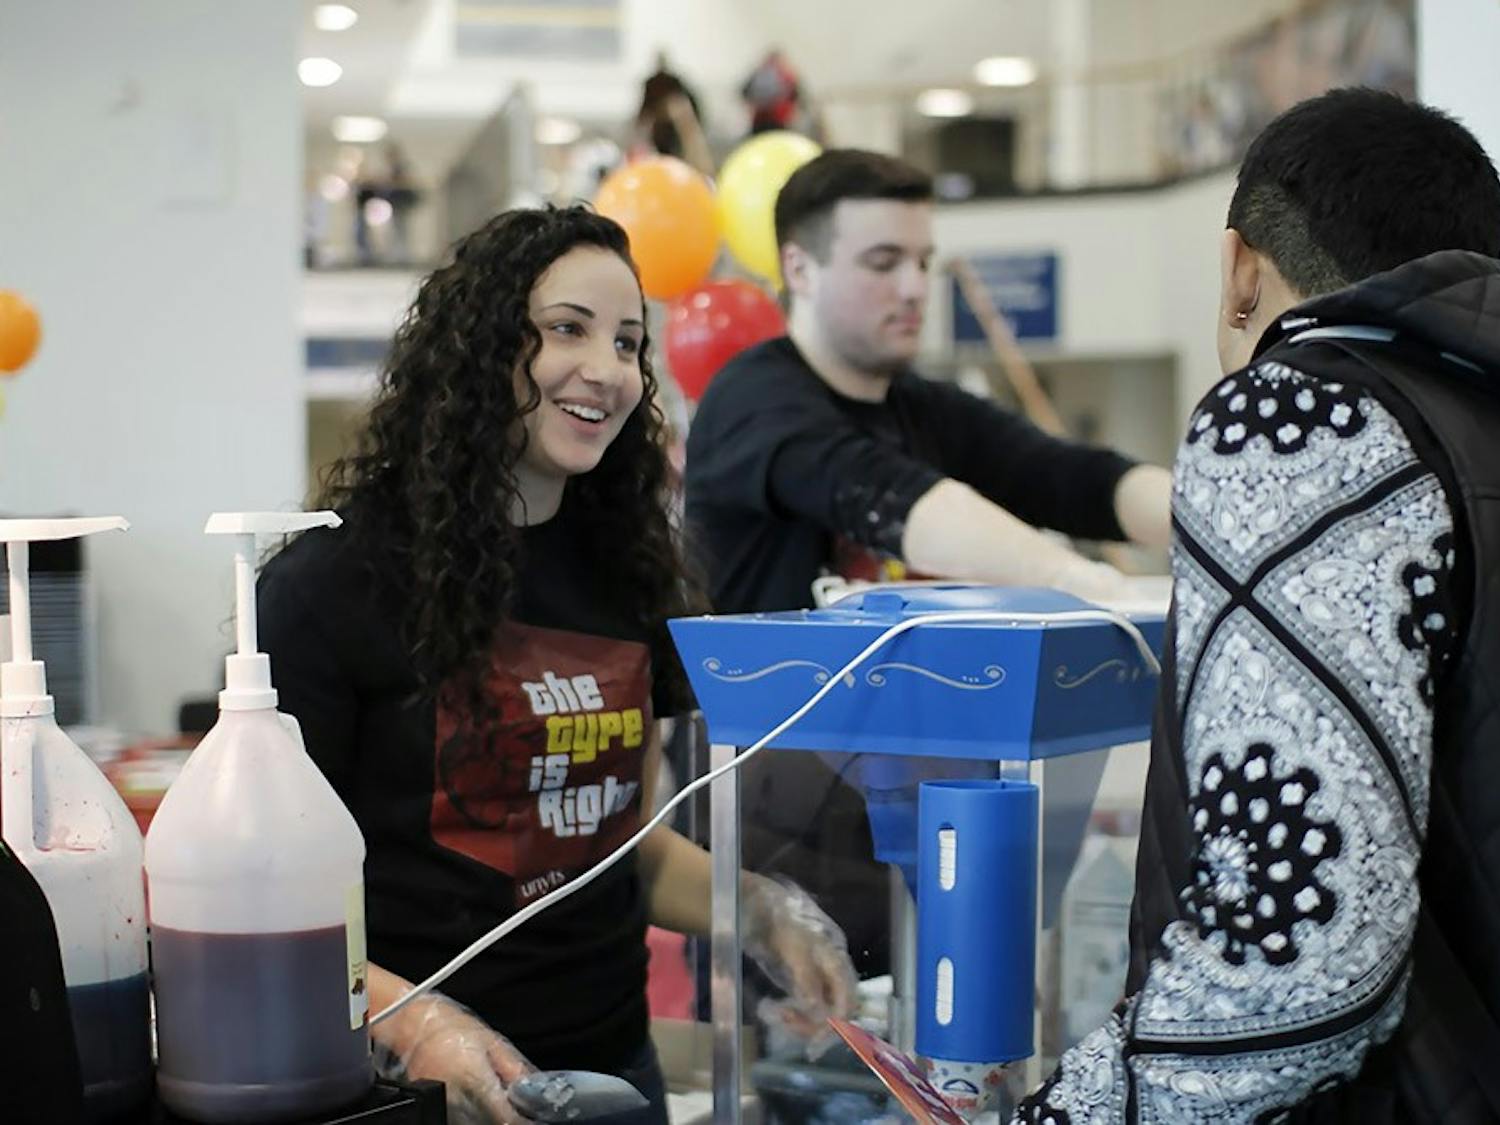 Carly Kreitzberg (front), a senior communication and psychology major, and James Roy (back), a senior communication major, serve snow cones and cotton candy to students as part of the "Type is Right" event aims to get more students to become organ donors.